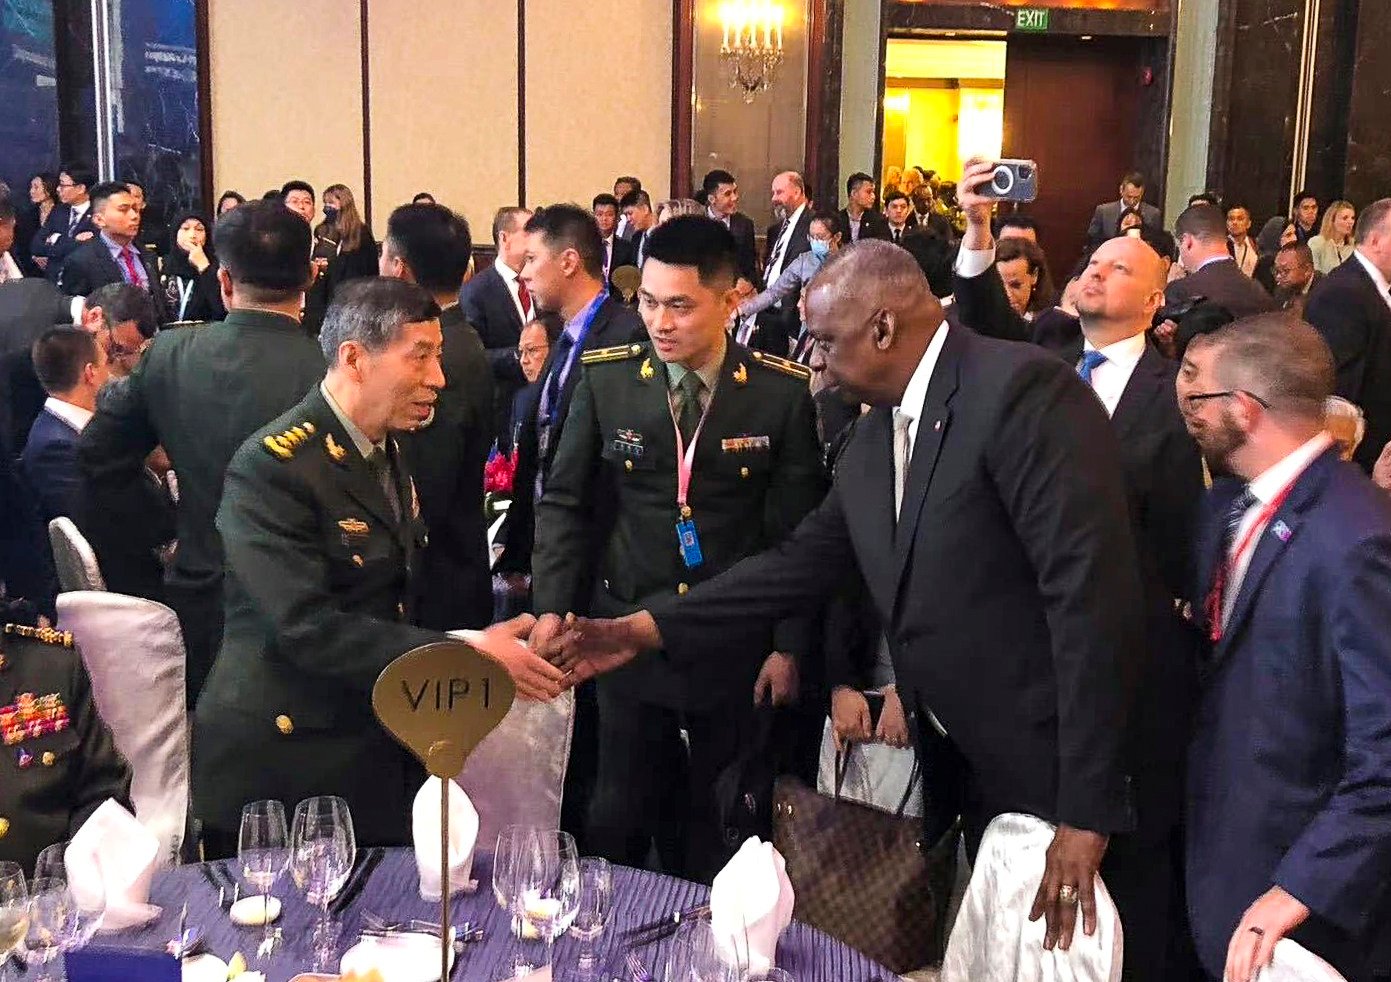 Chinese defence chief, General Li Shangfu, with US Secretary of Defense Lloyd Austin during the opening dinner for the Shangri-La Dialogue. Photo: Weibo